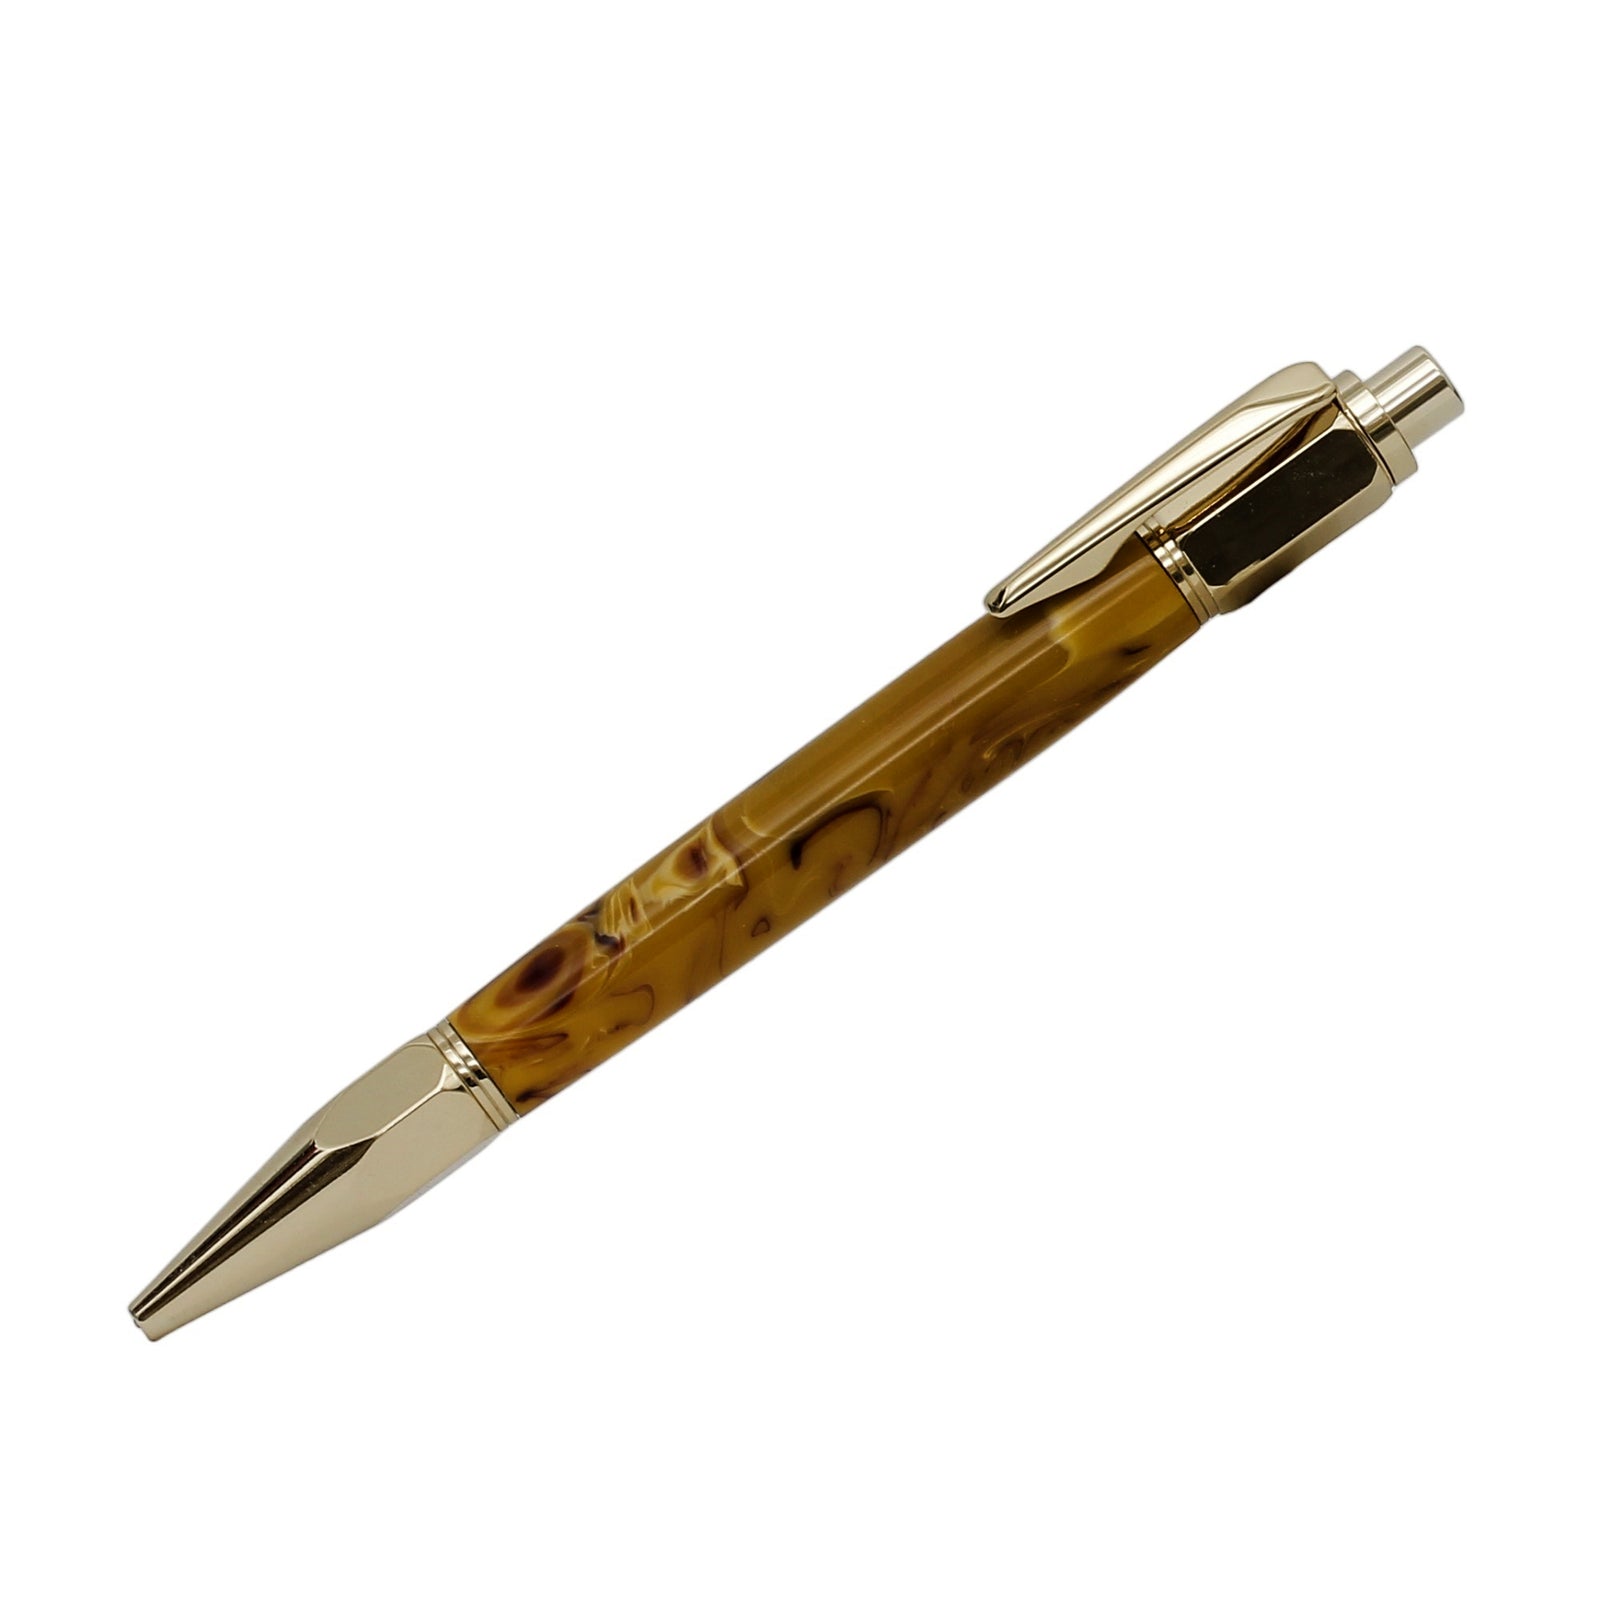 ART-PEN: Handcrafted Luxury Twist Rollerball Pen - Chrome with MIX BROWN acrylic hand turned body - Artistica.com